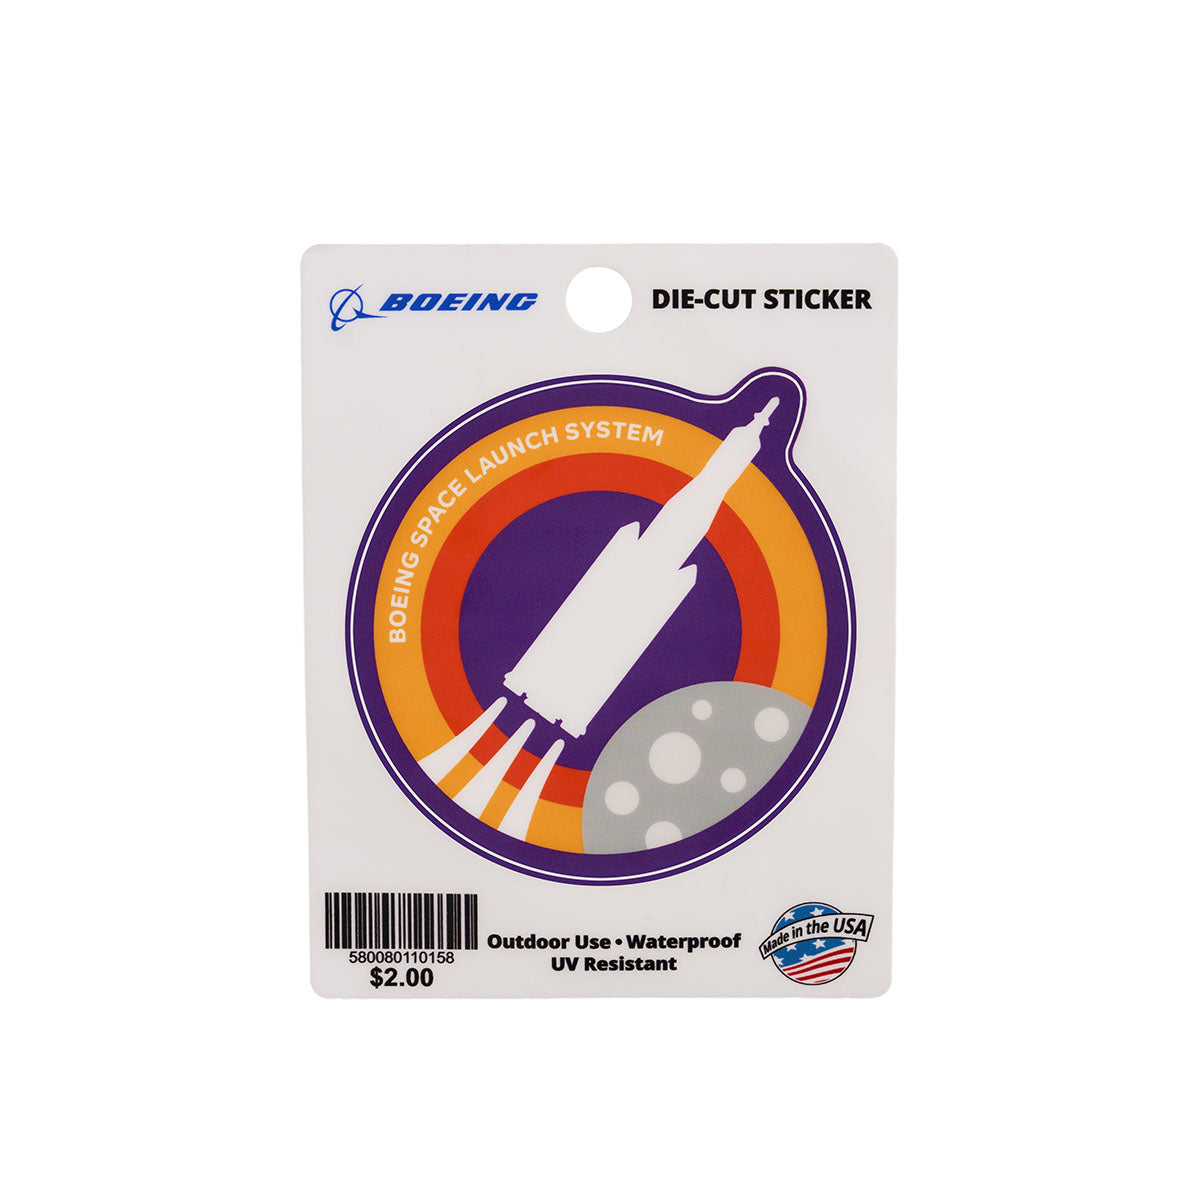  Skyward sticker, featuring the iconic Boeing Boeing Space Launch System in a roundel design. 